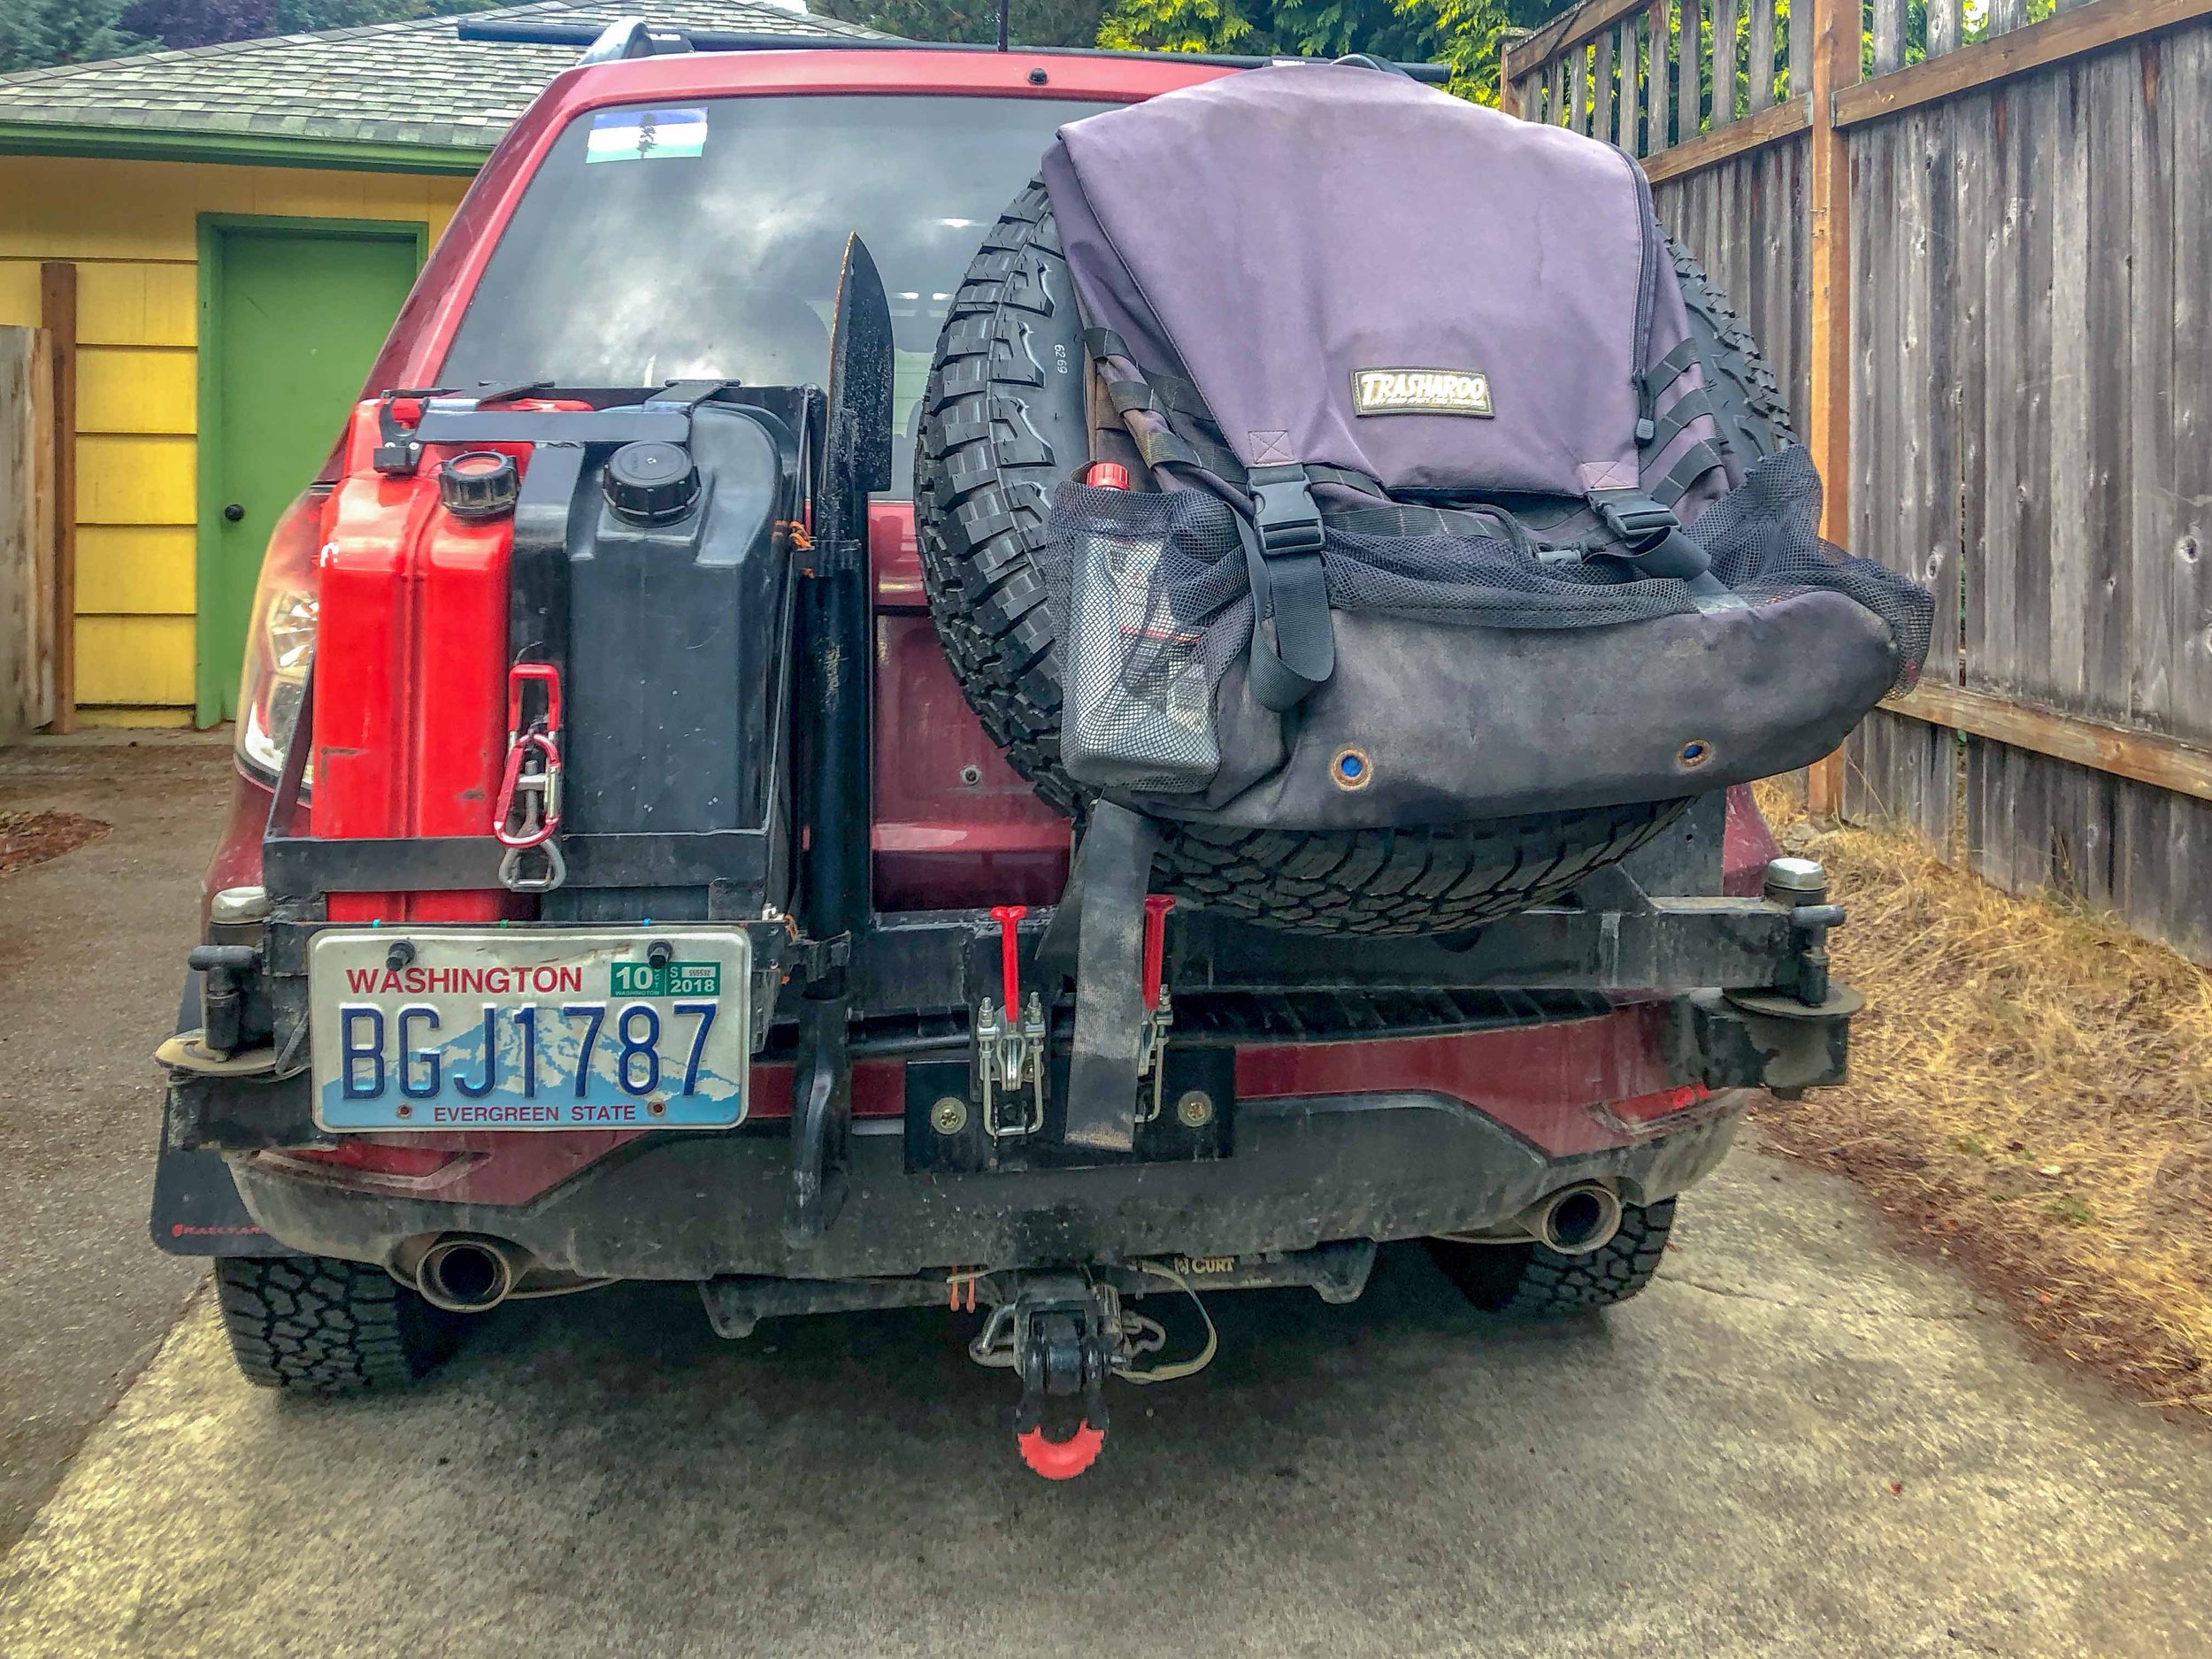 first-iteration-of-the-dual-swing-subaru-camper-two-dusty-travelers.jpg